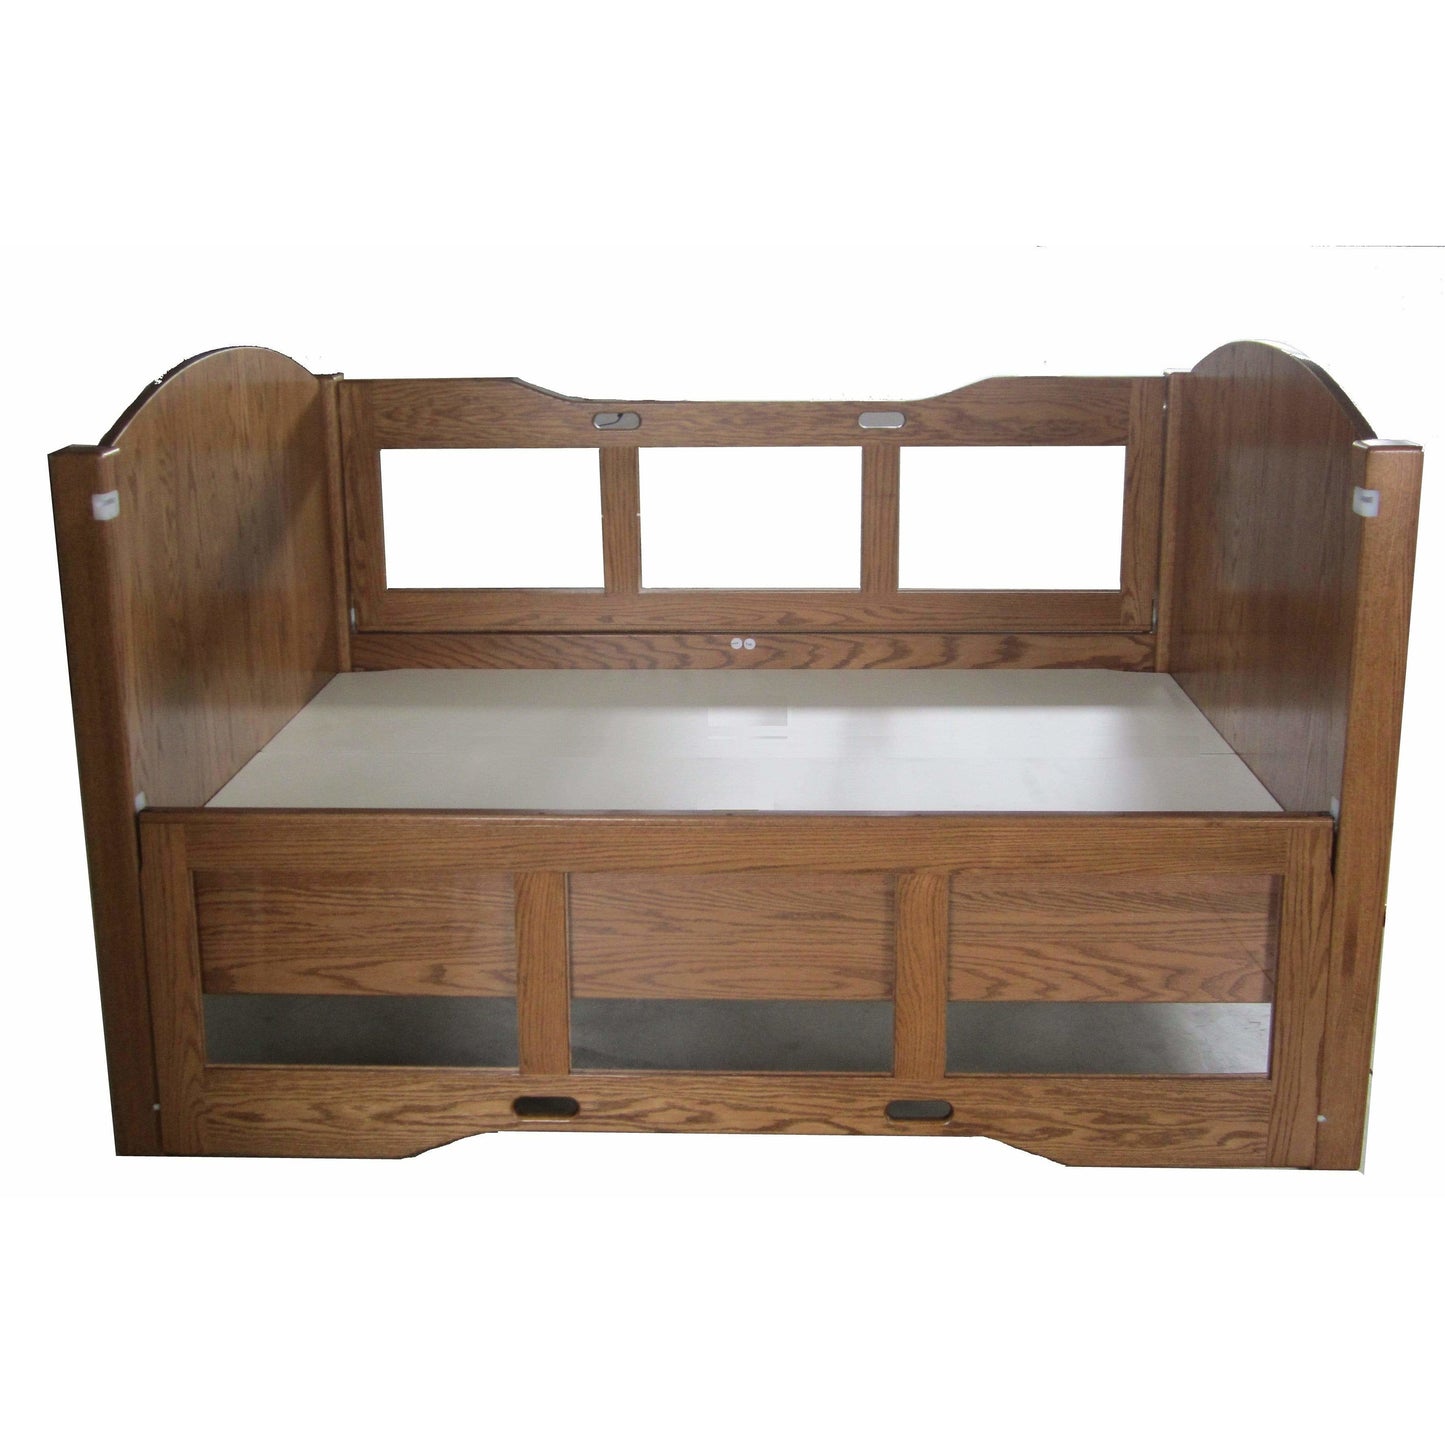 Beds by George Made to order Dream Series Fixed Surface Double Size Bed - Standard